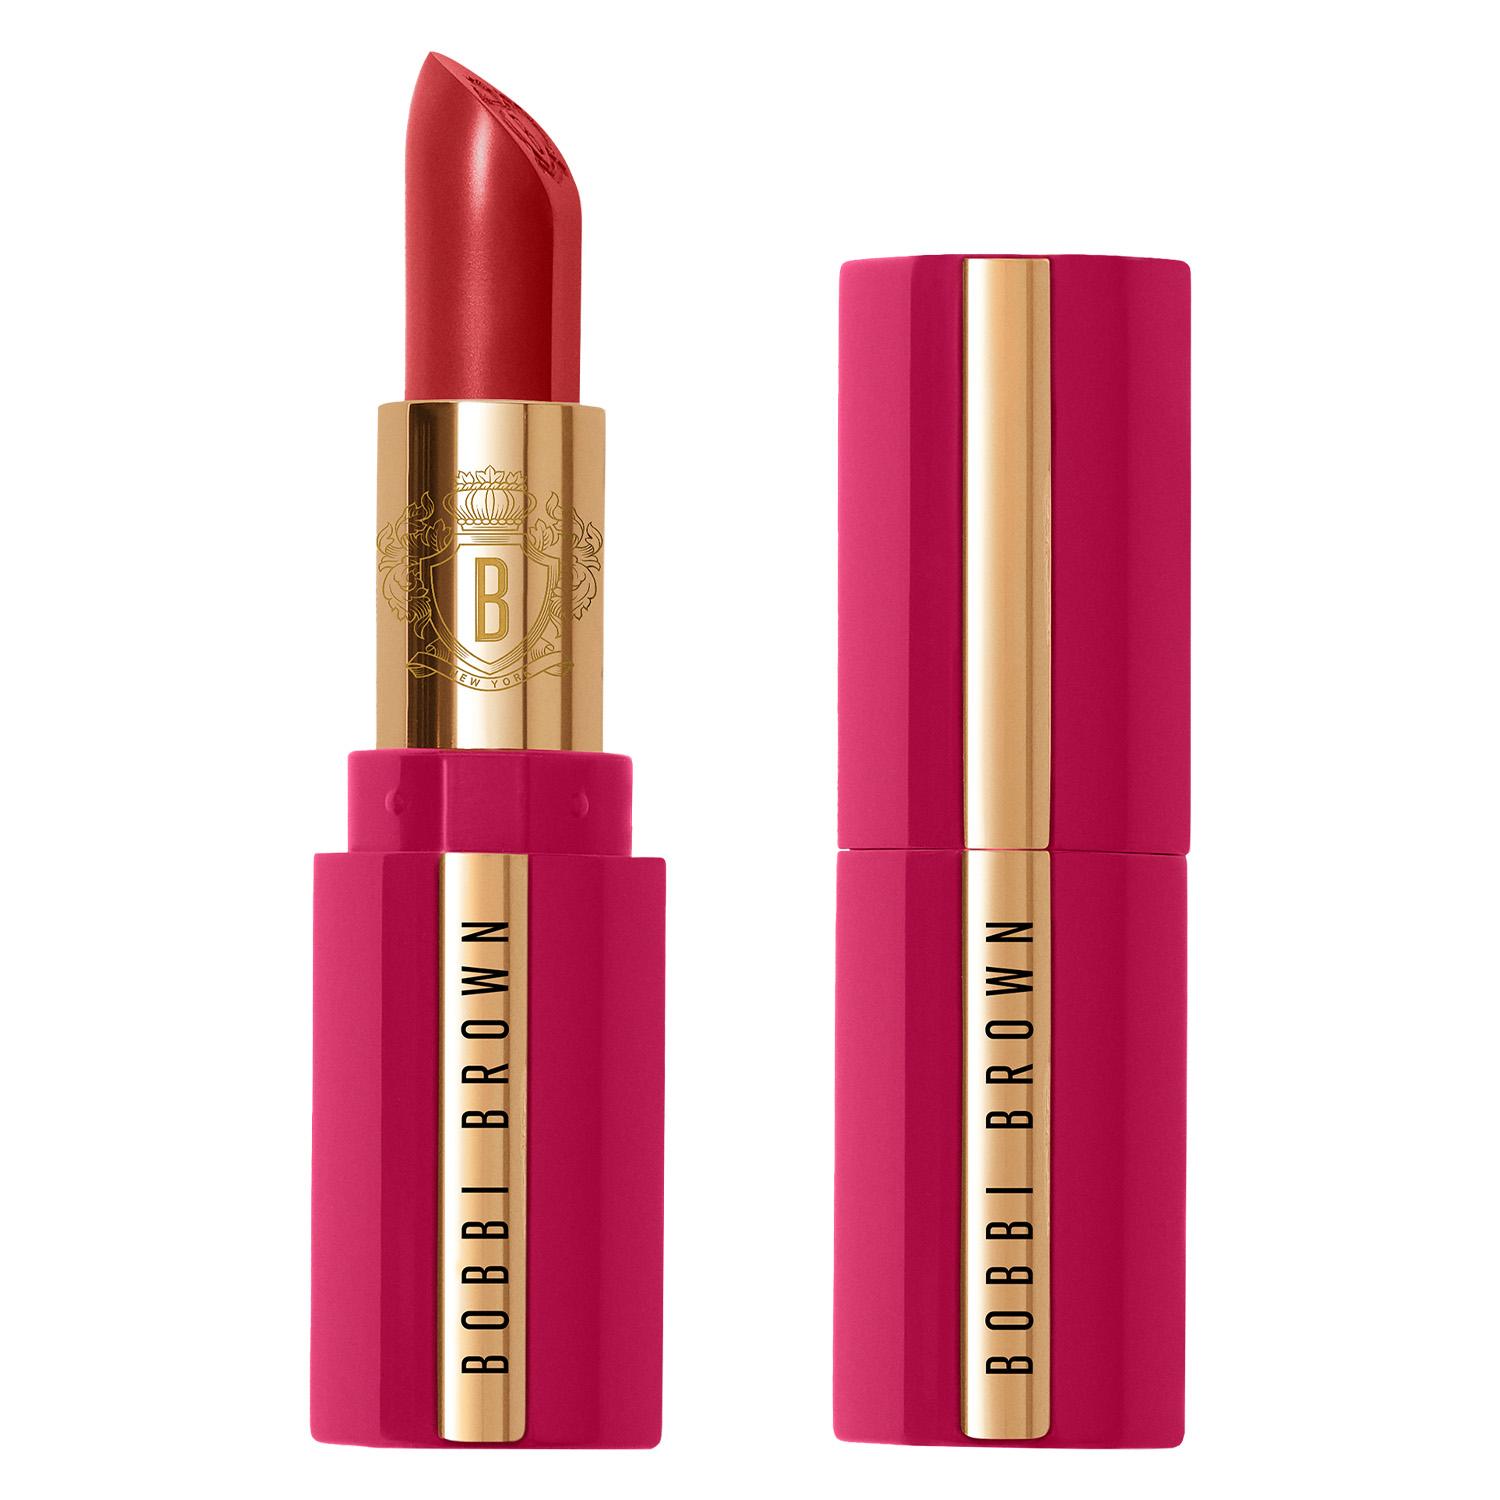 Lunar New Year Collection - Luxe Lipstick Parisian Red